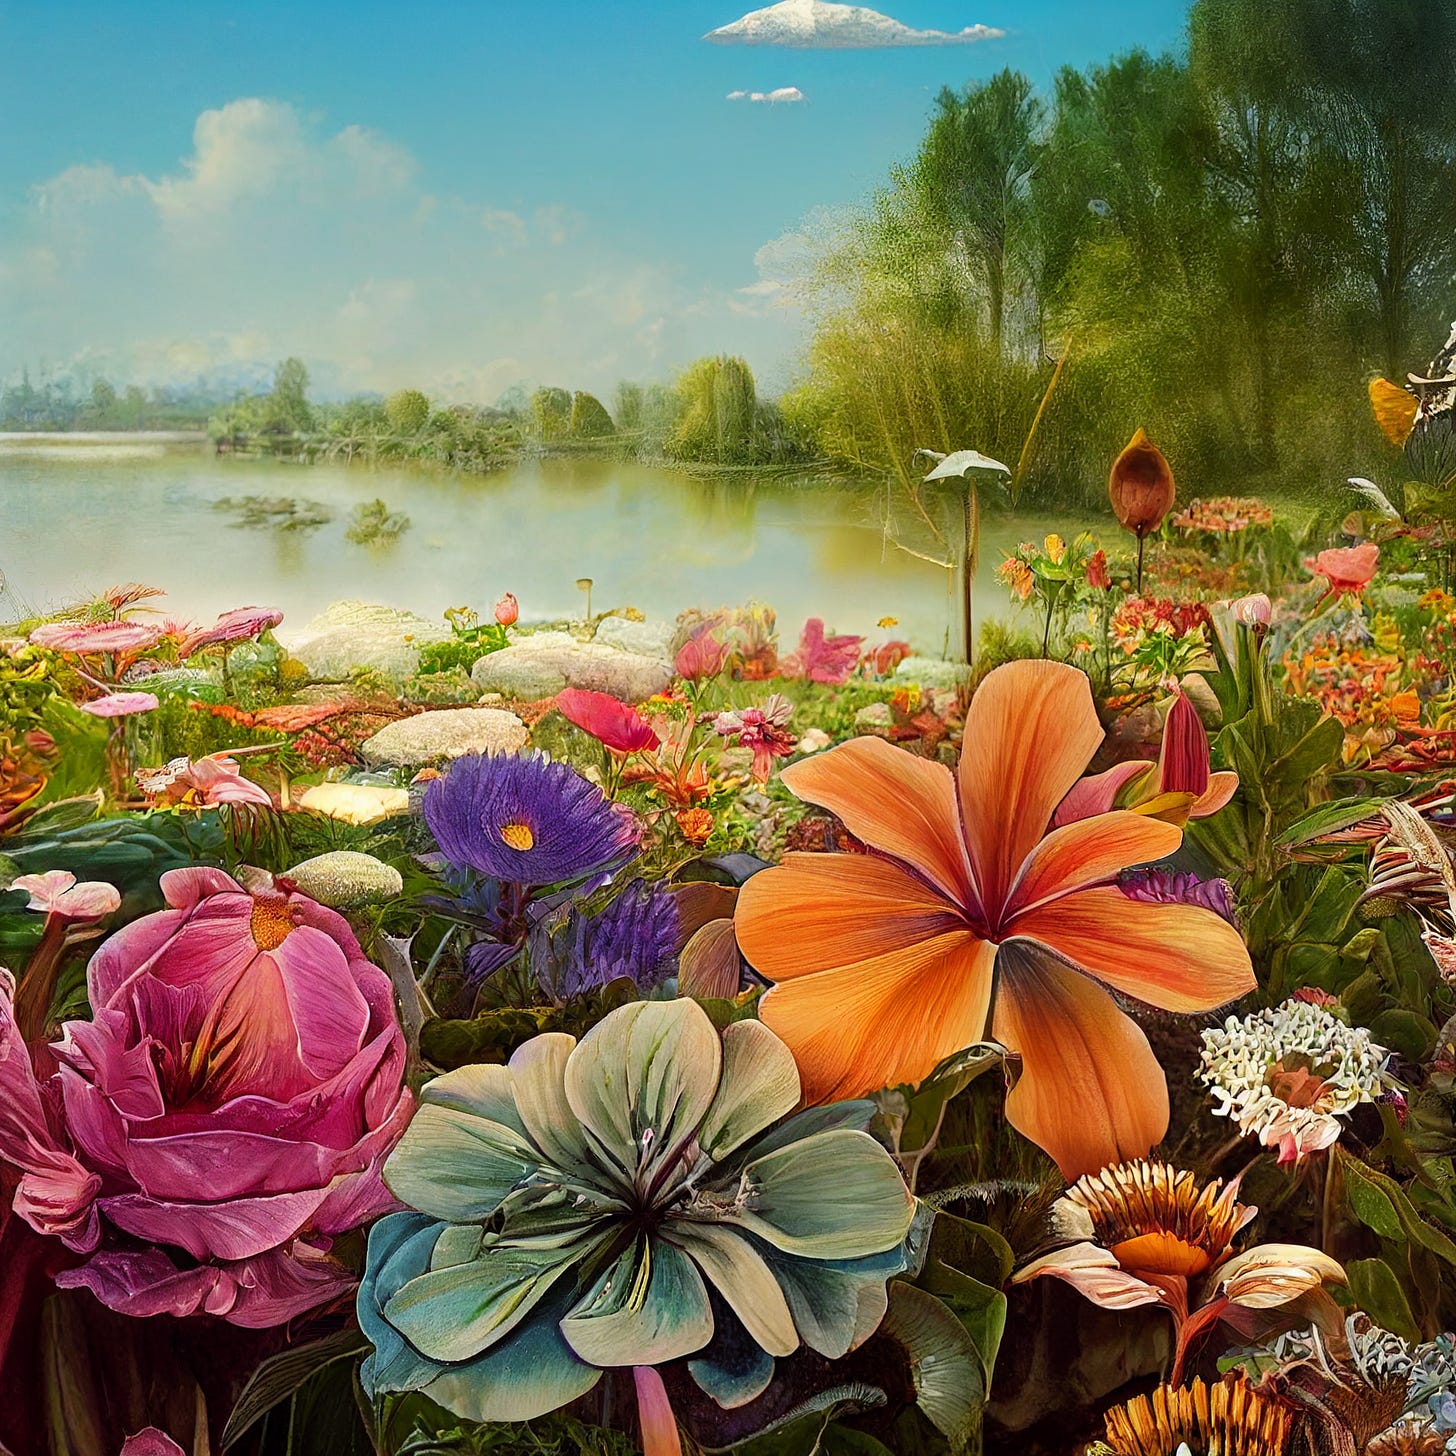 A colorful garden on the edge of lake with trees around the edges